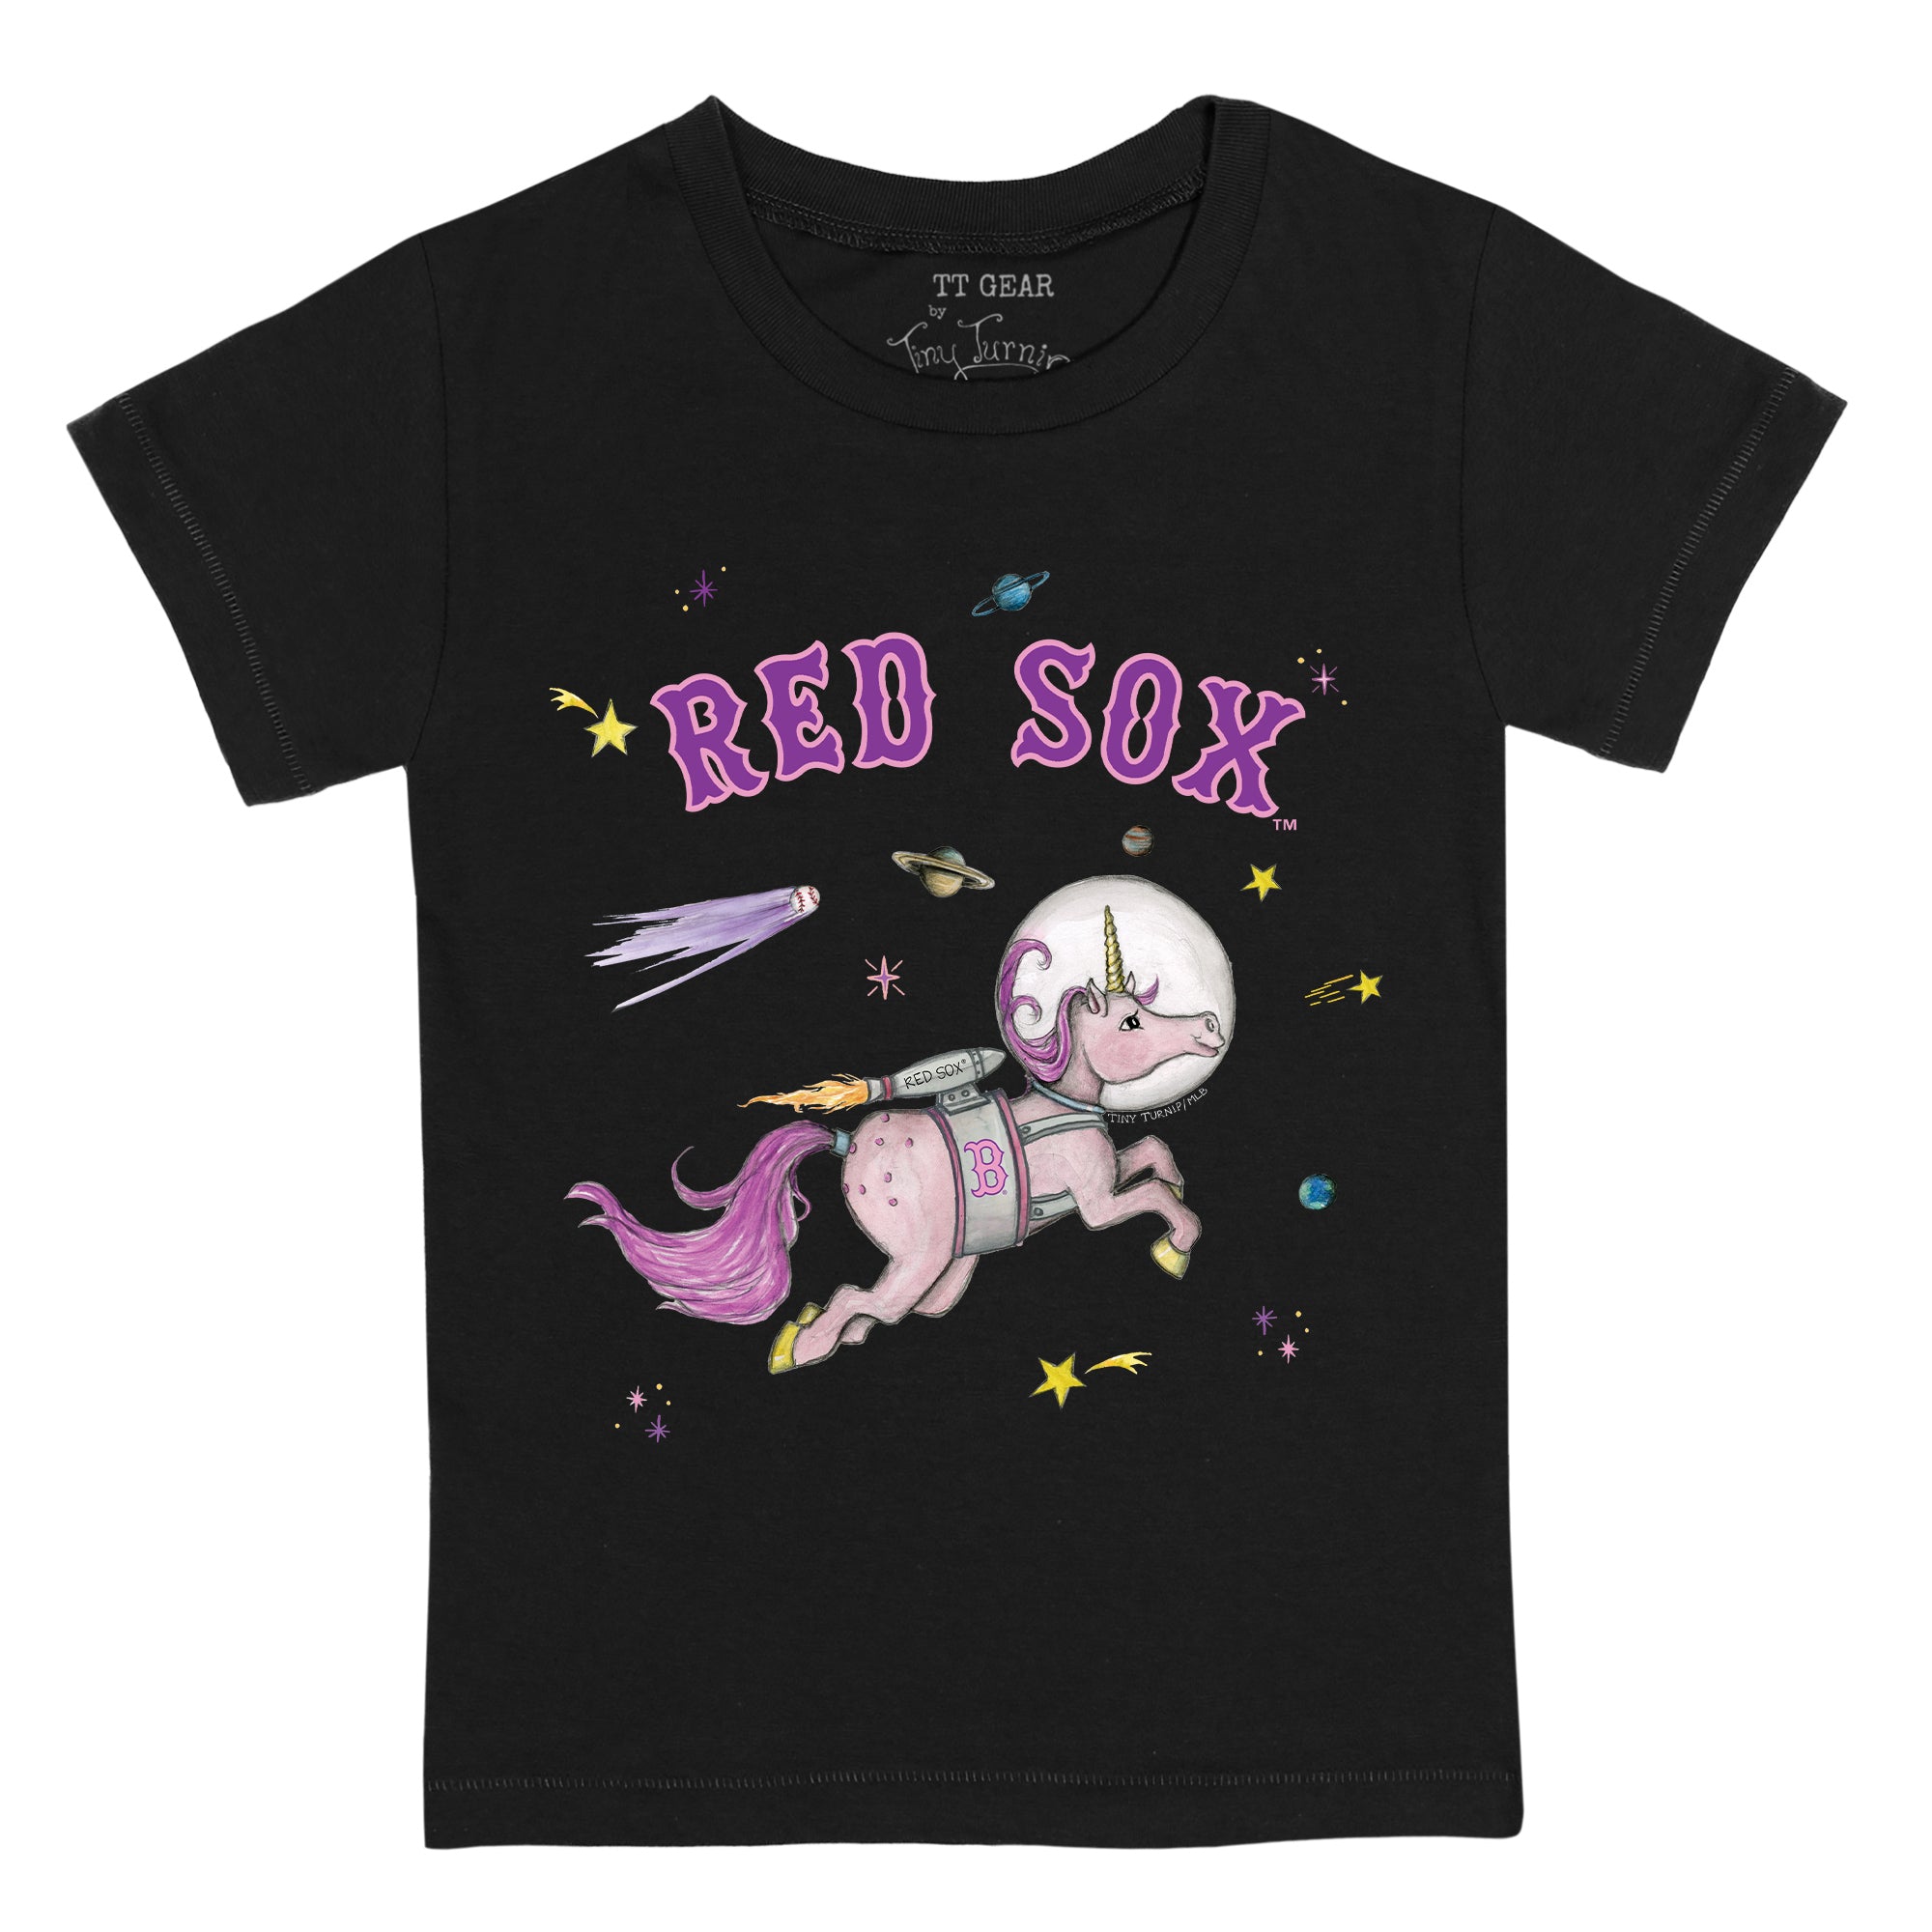 Fenway Kids T-Shirts for Sale